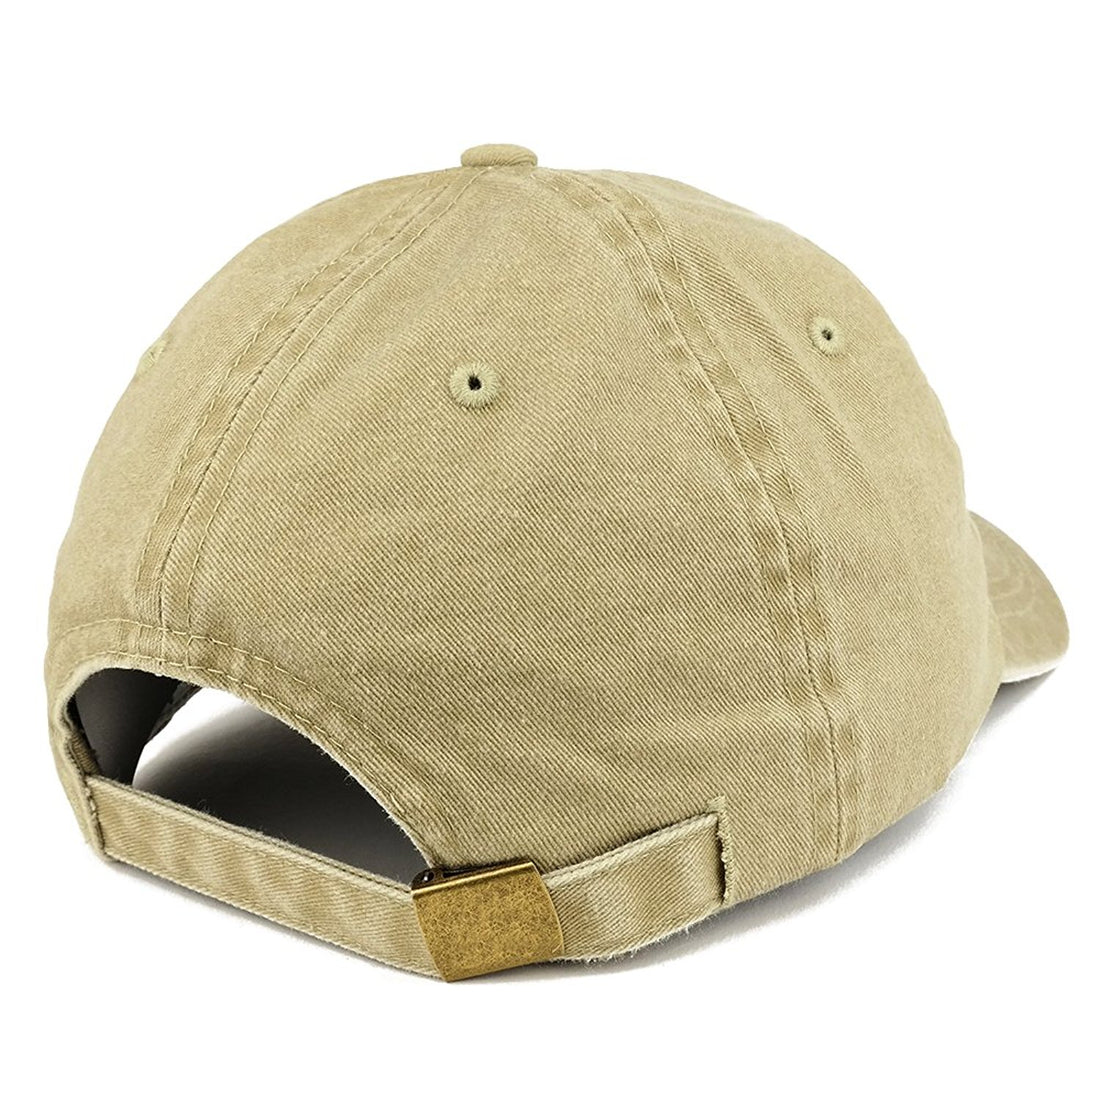 Trendy Apparel Shop Established 1954 Embroidered 65th Birthday Gift Pigment Dyed Washed Cotton Cap